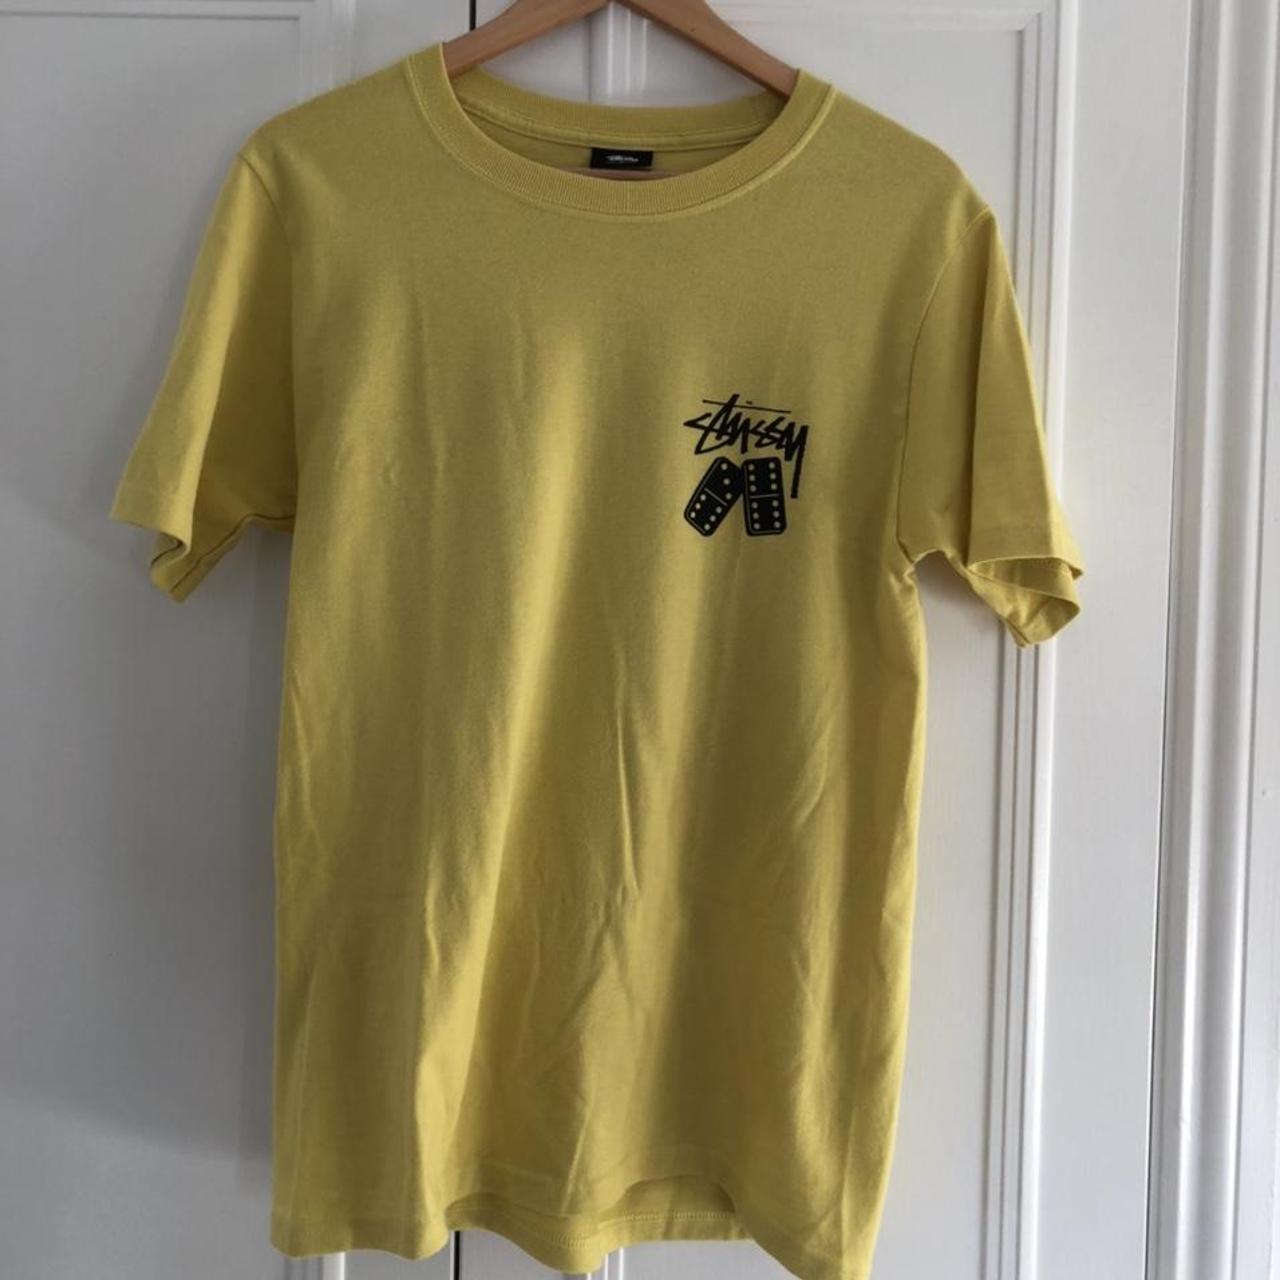 Stussy domino t shirt yellow and black mens size Small - Depop